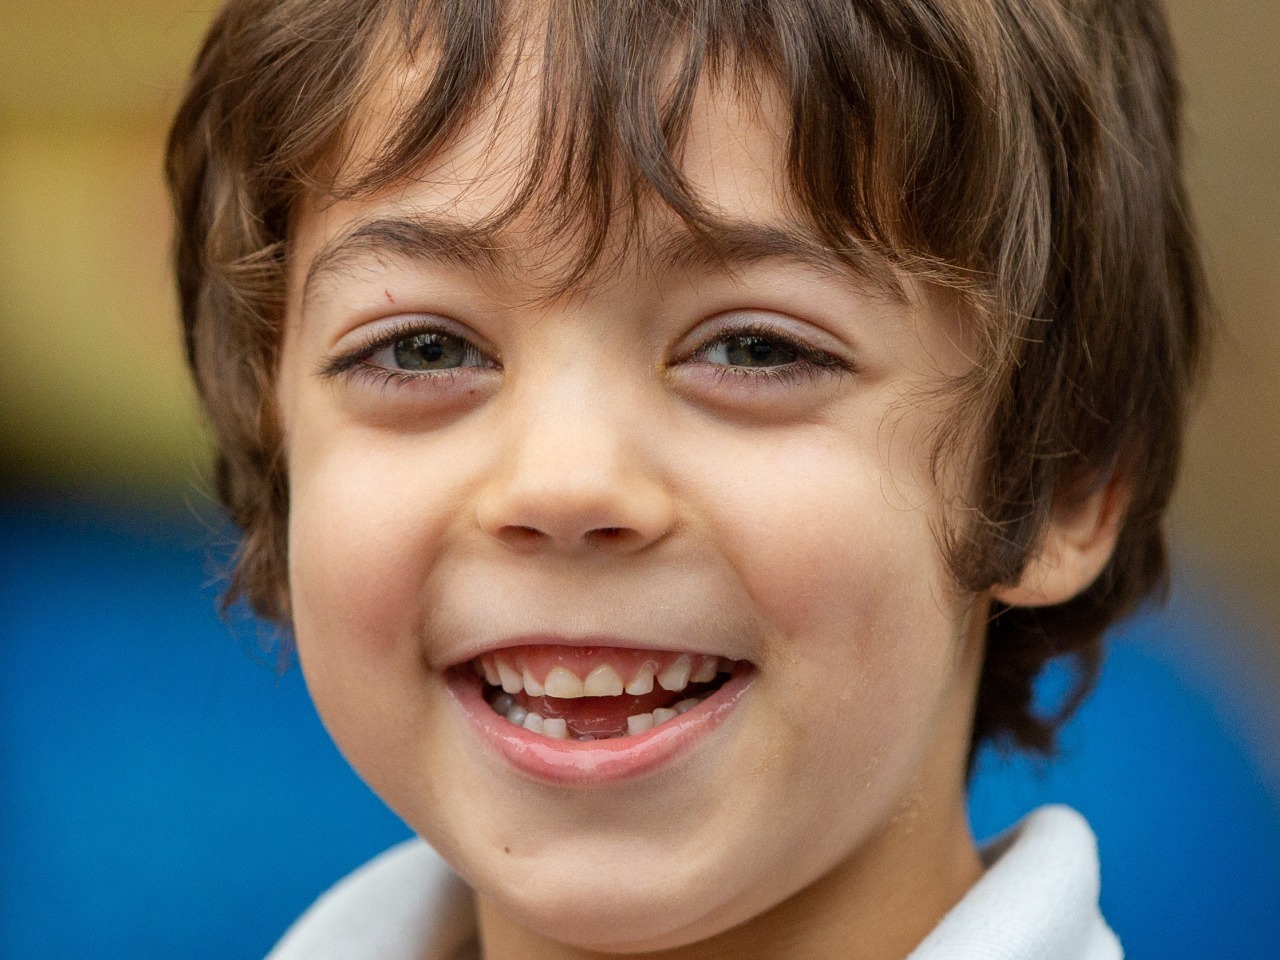 Lovely toothless grin from this striking young boy